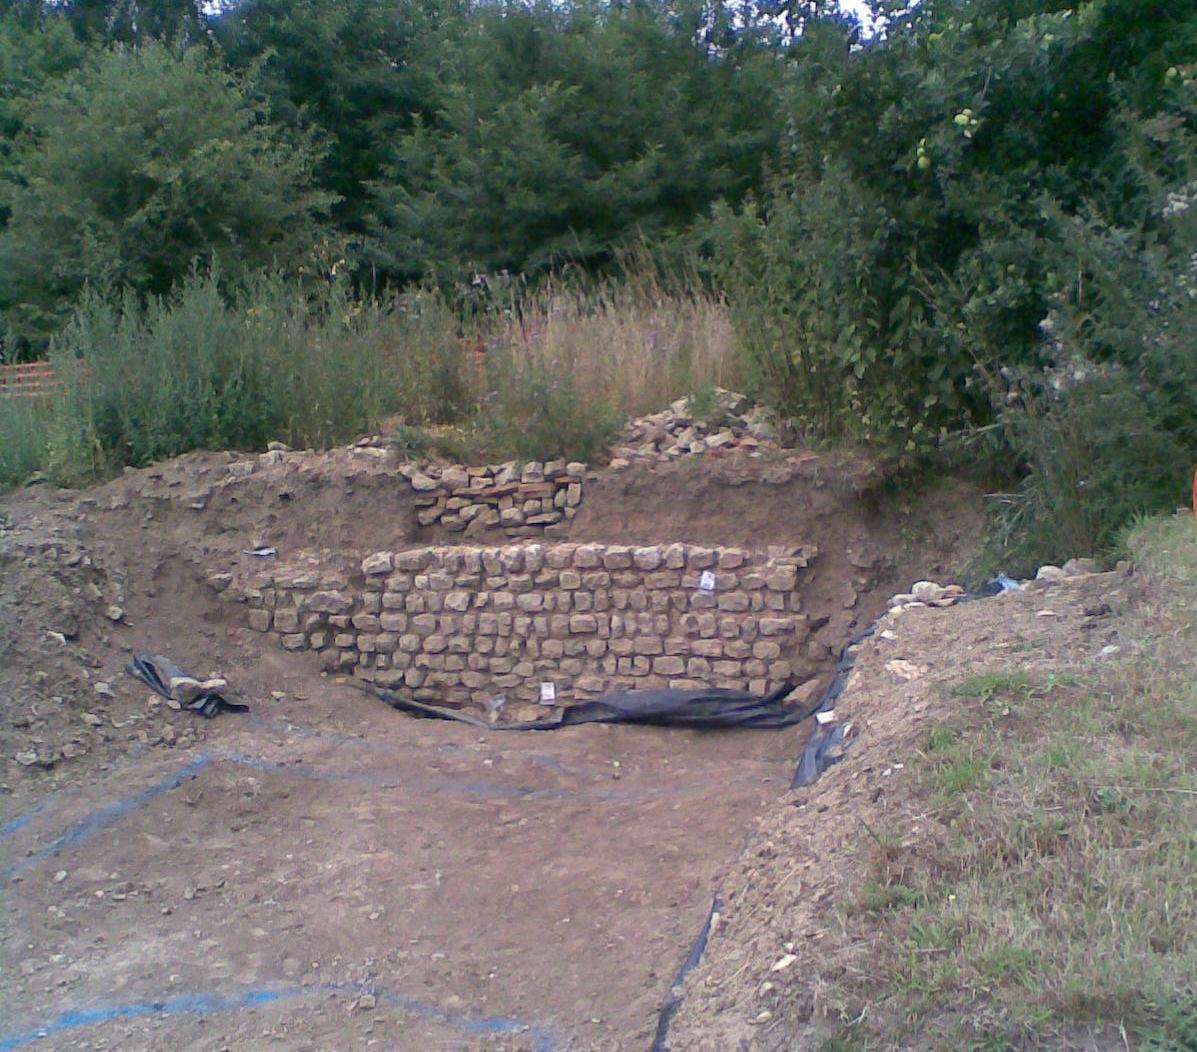 POOR QUALITY 3 COLS ONLY Name: RAGSTONE TN Caption: Ragstone walls excavated in an archaeological dig at the East Farleigh Roman Villa Location: East Farleigh Copyright: Submitted by Tom La Dell, Landscape Architects, 01622 850245 Category: Heritage and History From: Nick Yandle [mailto:Nick.Yandle@gallagher-group.co.uk] POOR QUALITY 3 COLS ONLY KM GROUP USE ONLY Supplied by : Tom La Dell, Landscape Architects, 01622 850245 Copyright: (3538520)